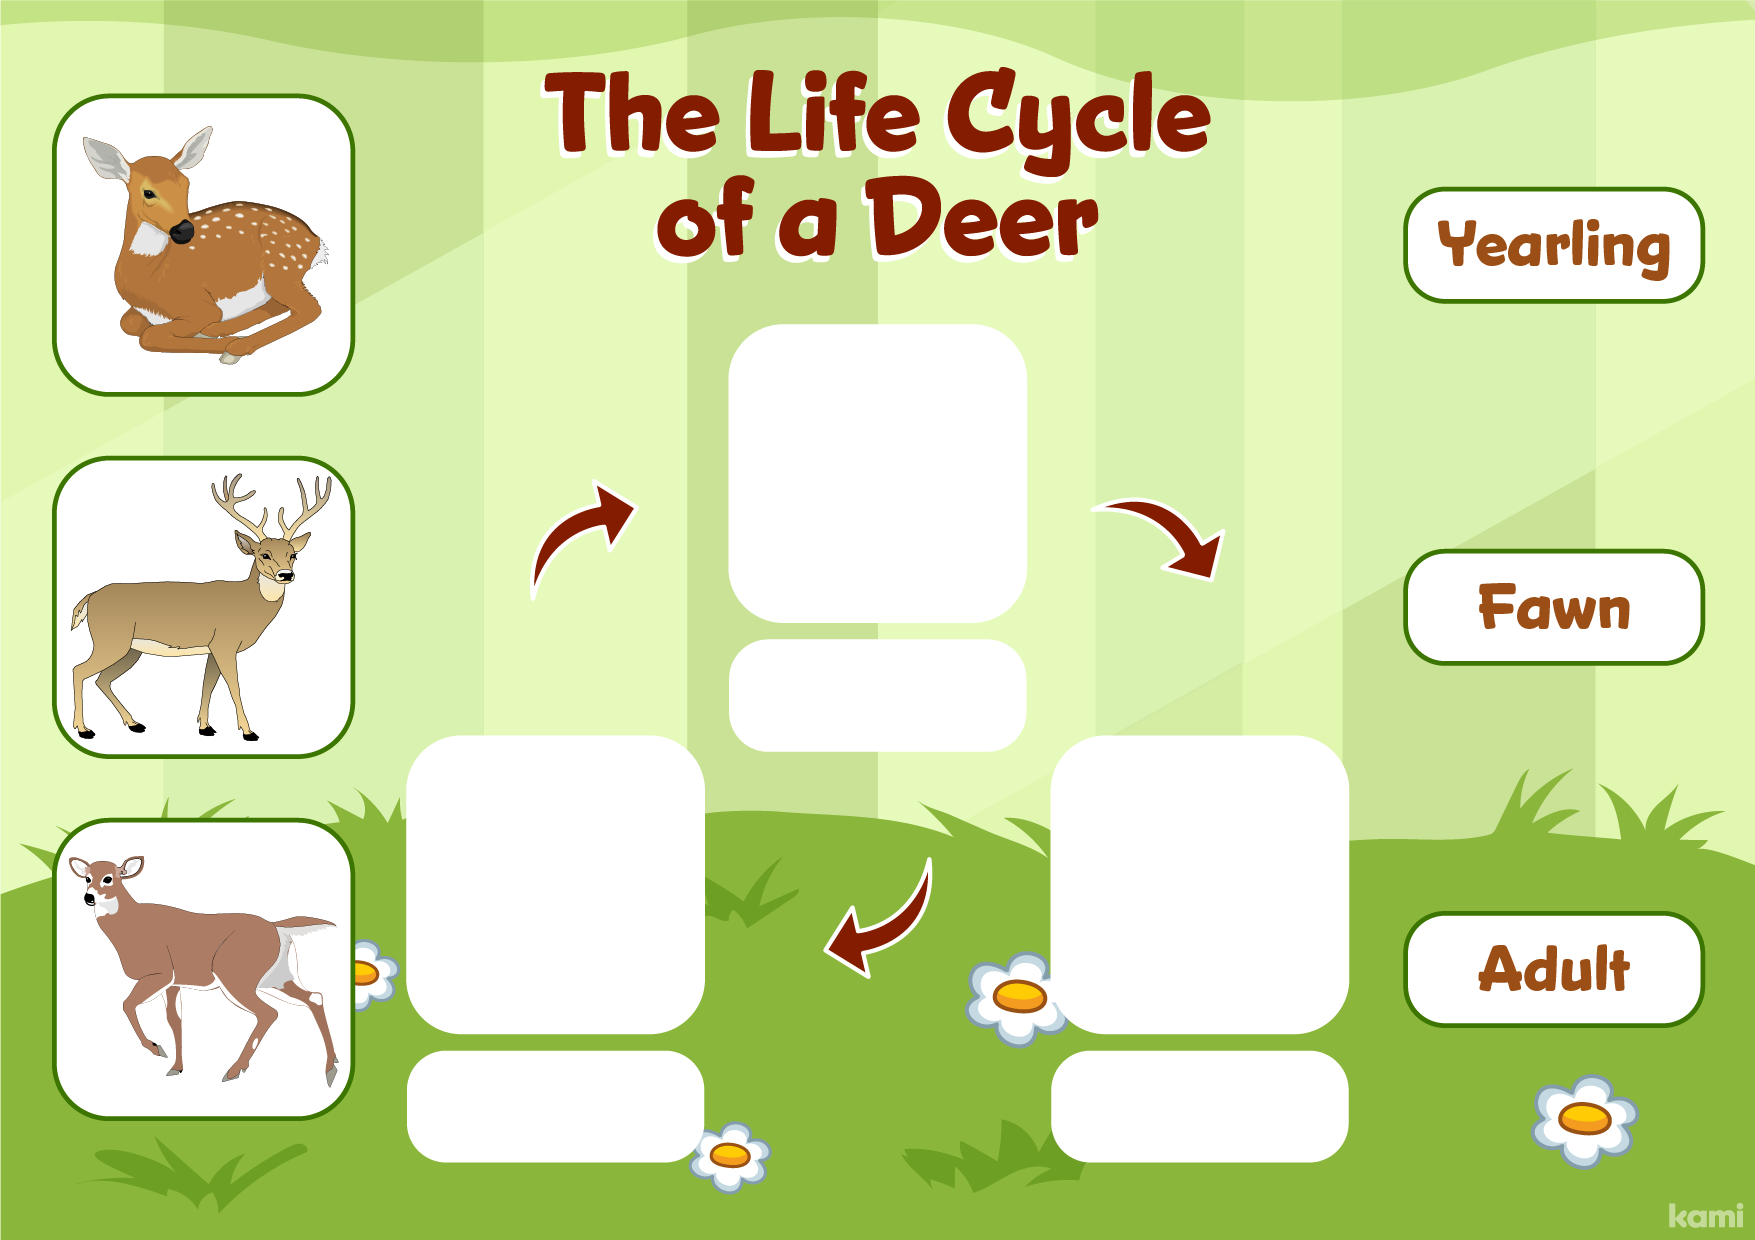 A deer life cycle for younger learners with a interactive activity.